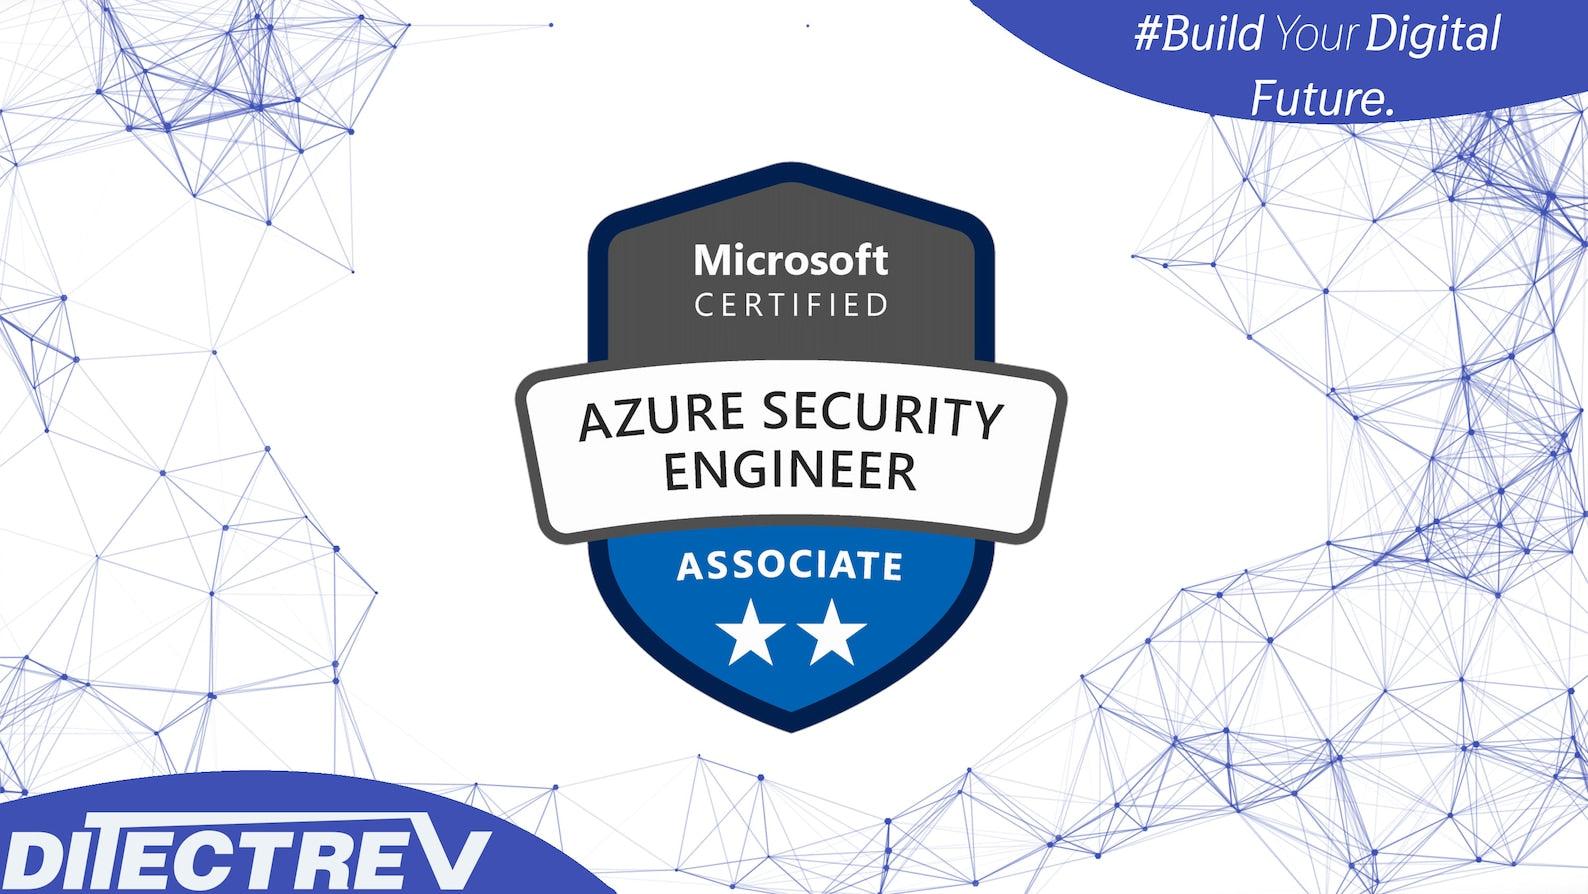 Microsoft Azure AZ-500 (Azure Security Engineer) Practice Tests Exams Questions & Answers